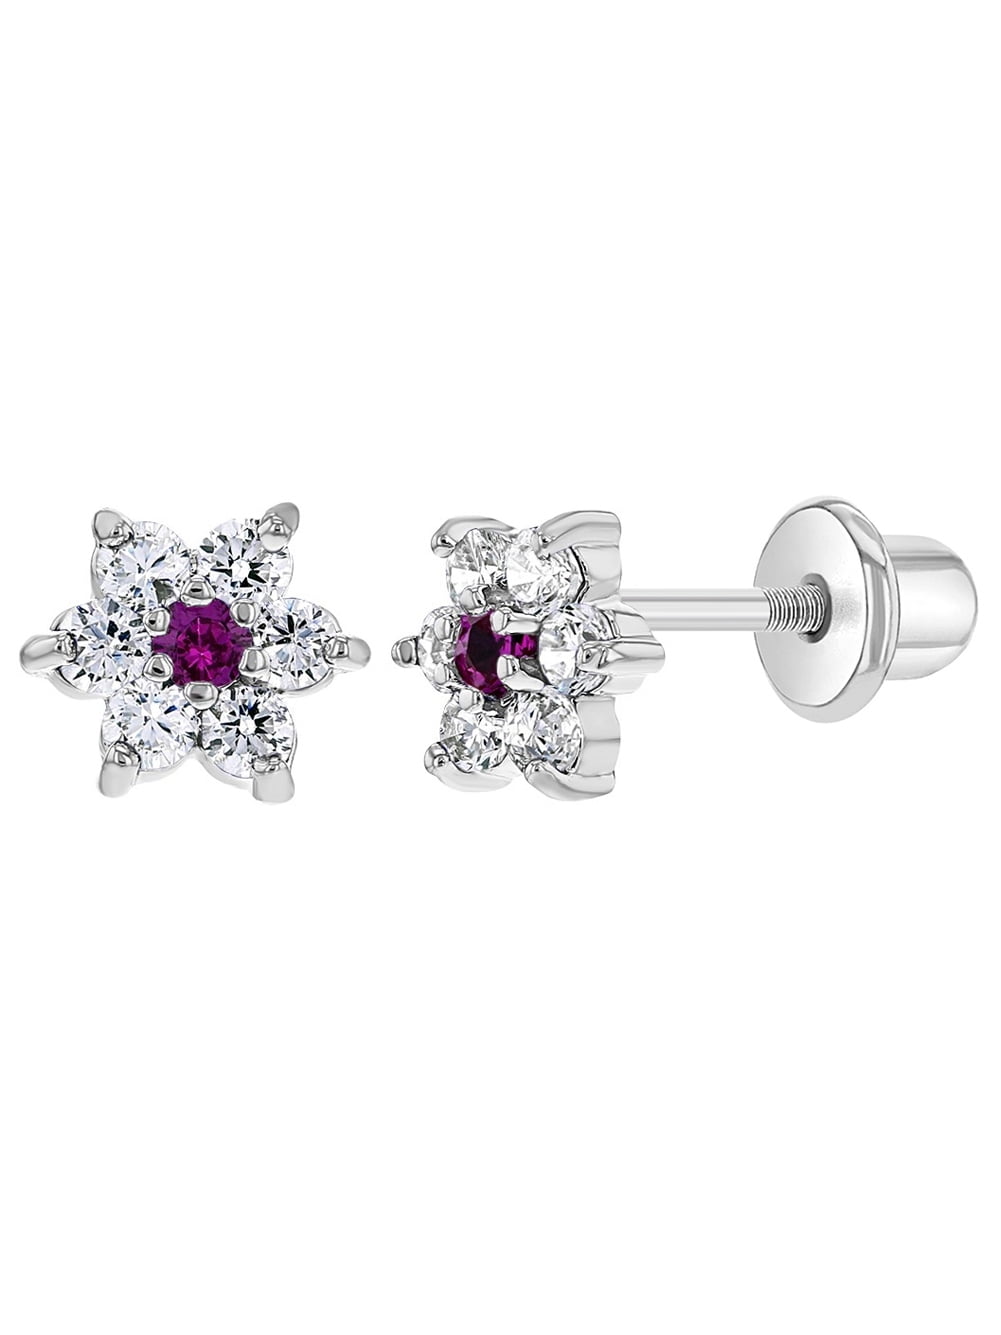 Rhodium Plated Clear Fuchsia Crystal Mouse Bow Screw Back Girls Kids Earrings 